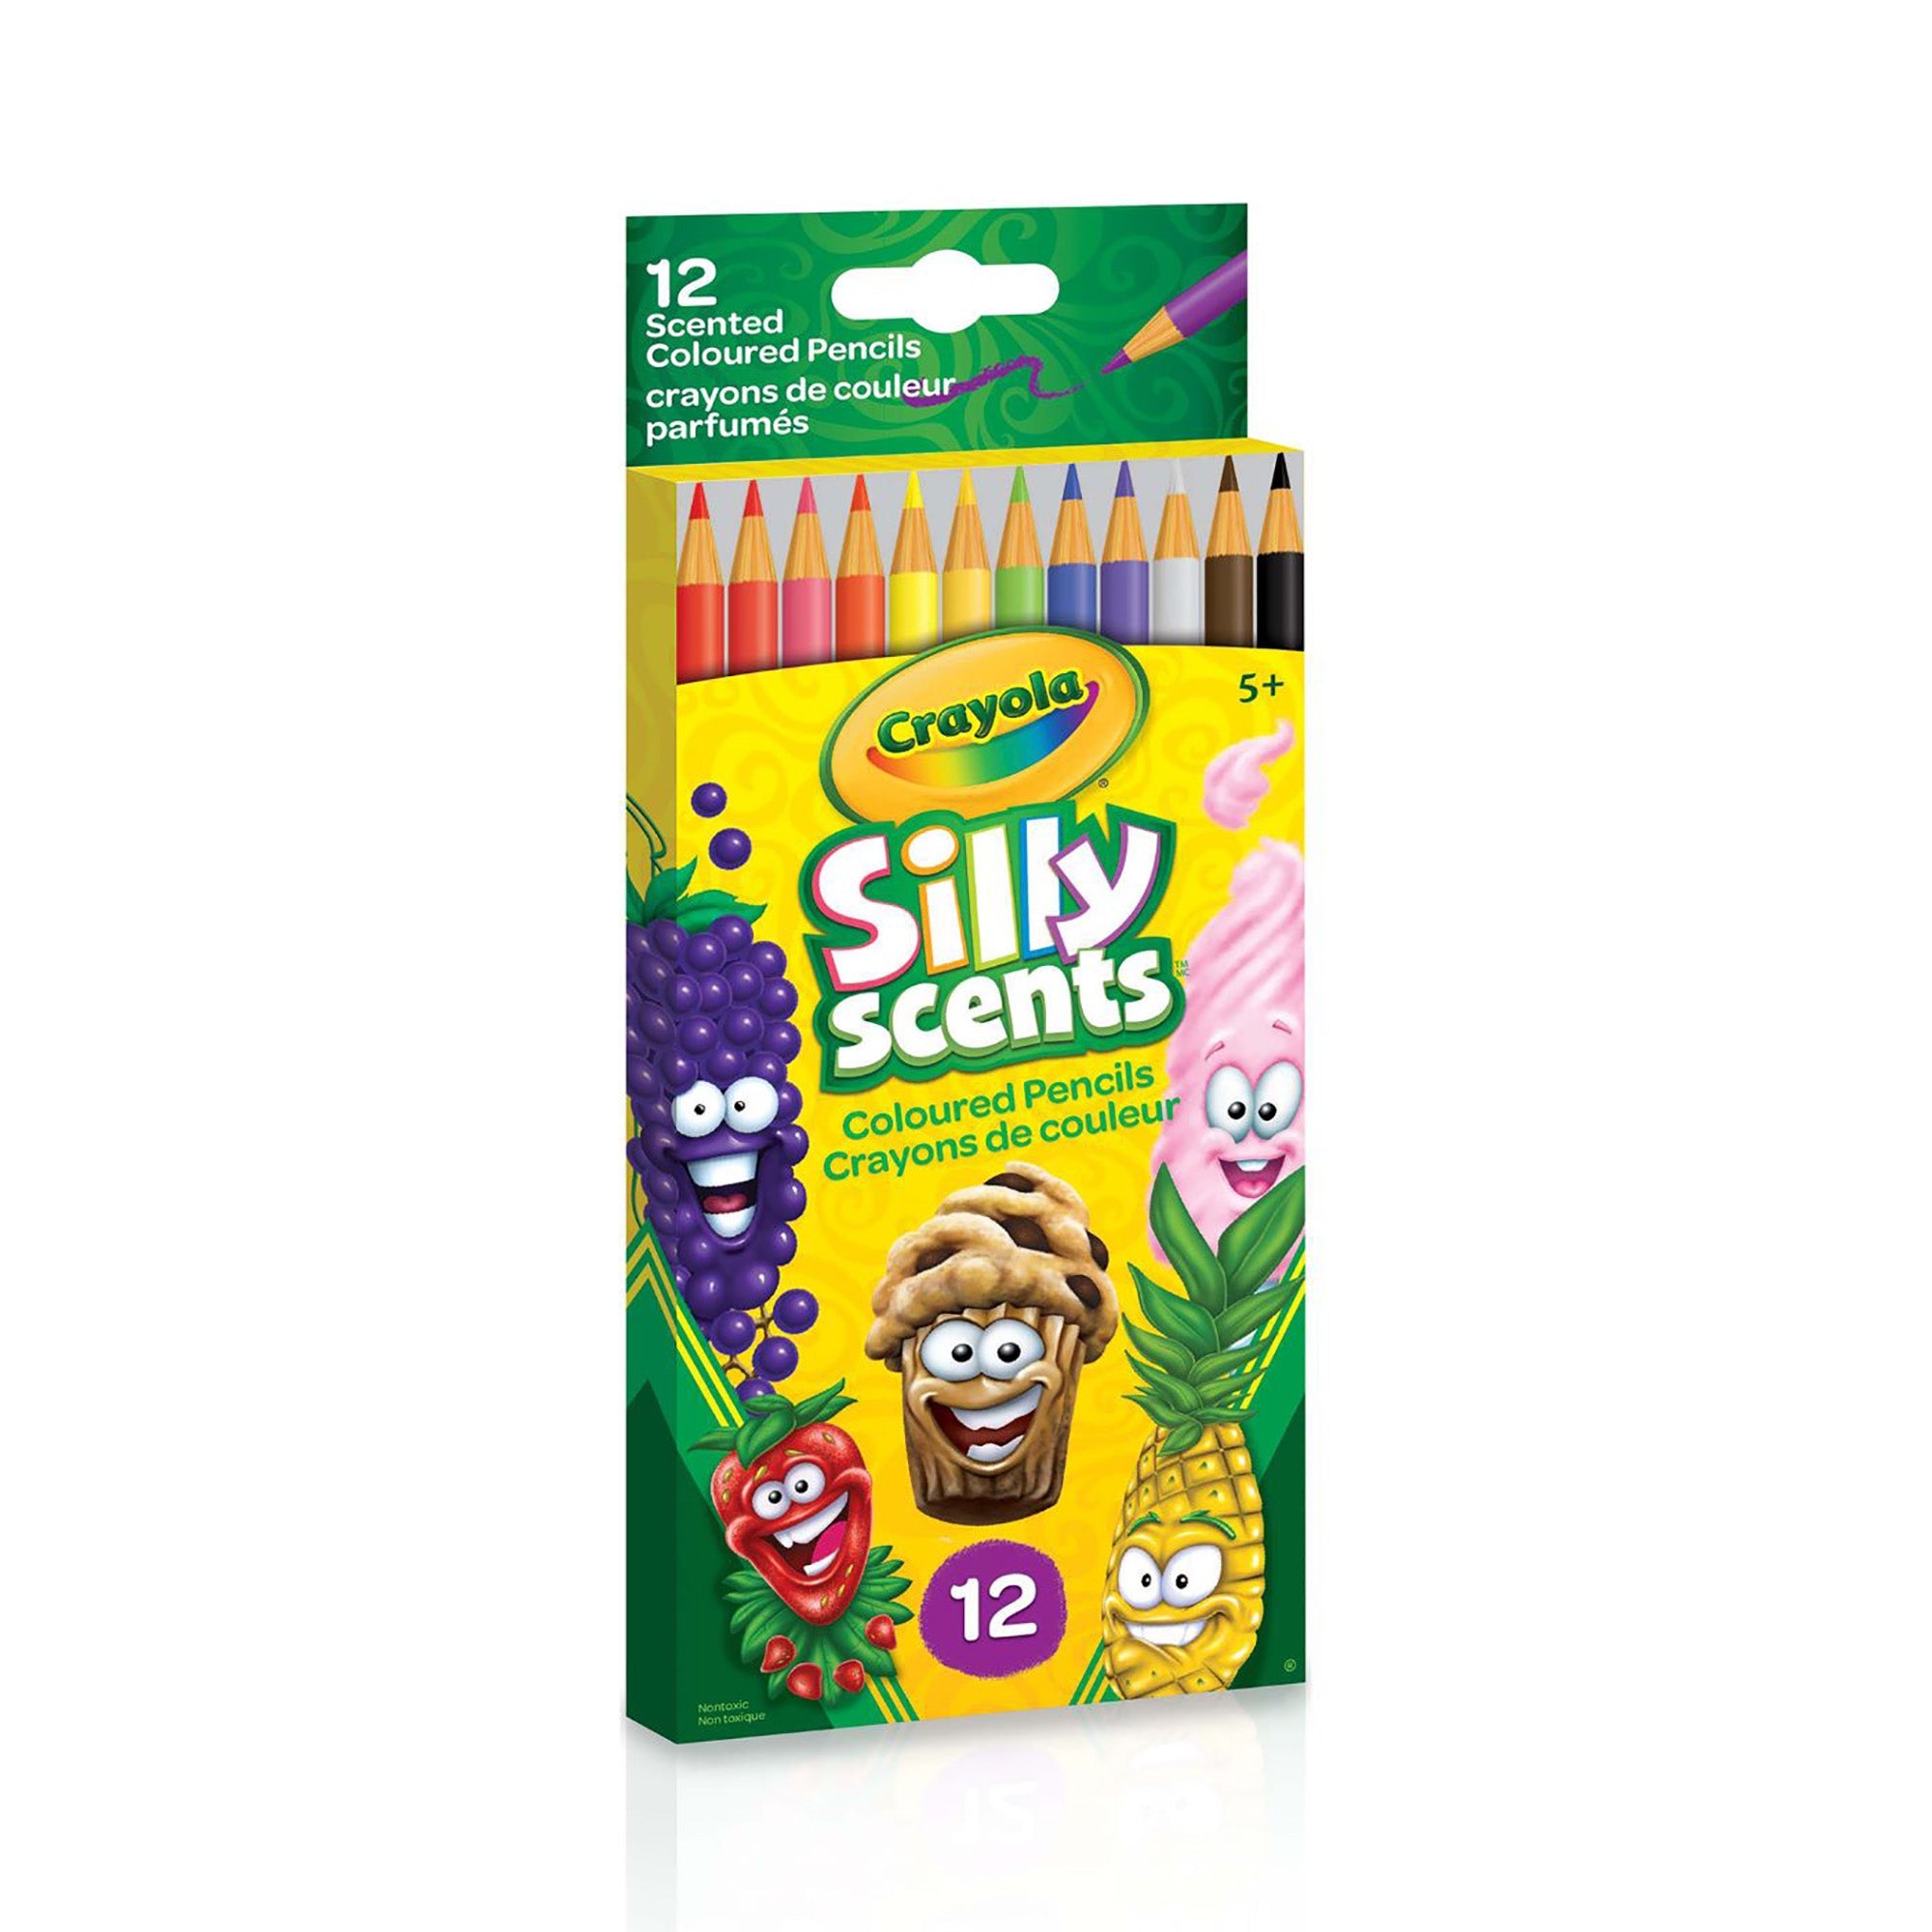 Crayola Silly Scents 12 Colored Pencils 